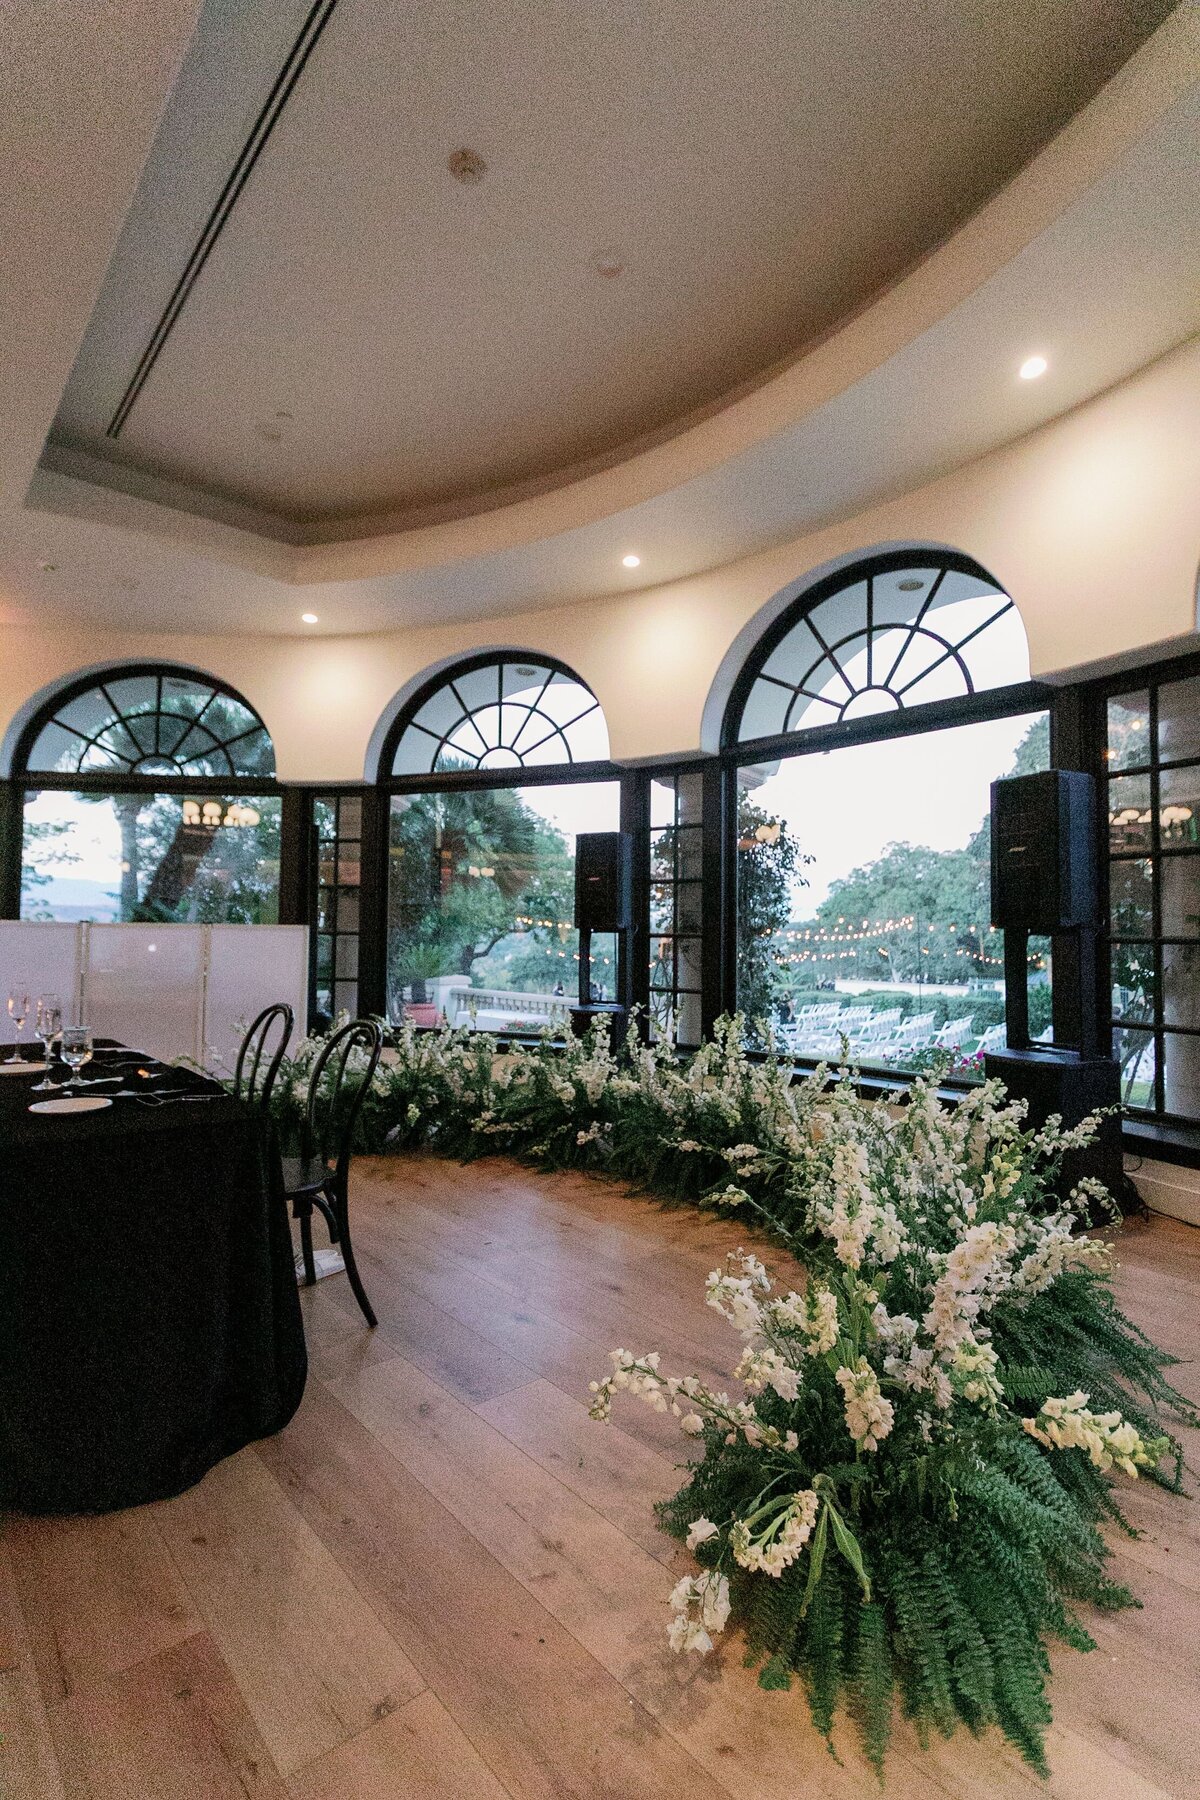 A half moon full of white flowers and greenery lines the floor behind the bridal dining table.